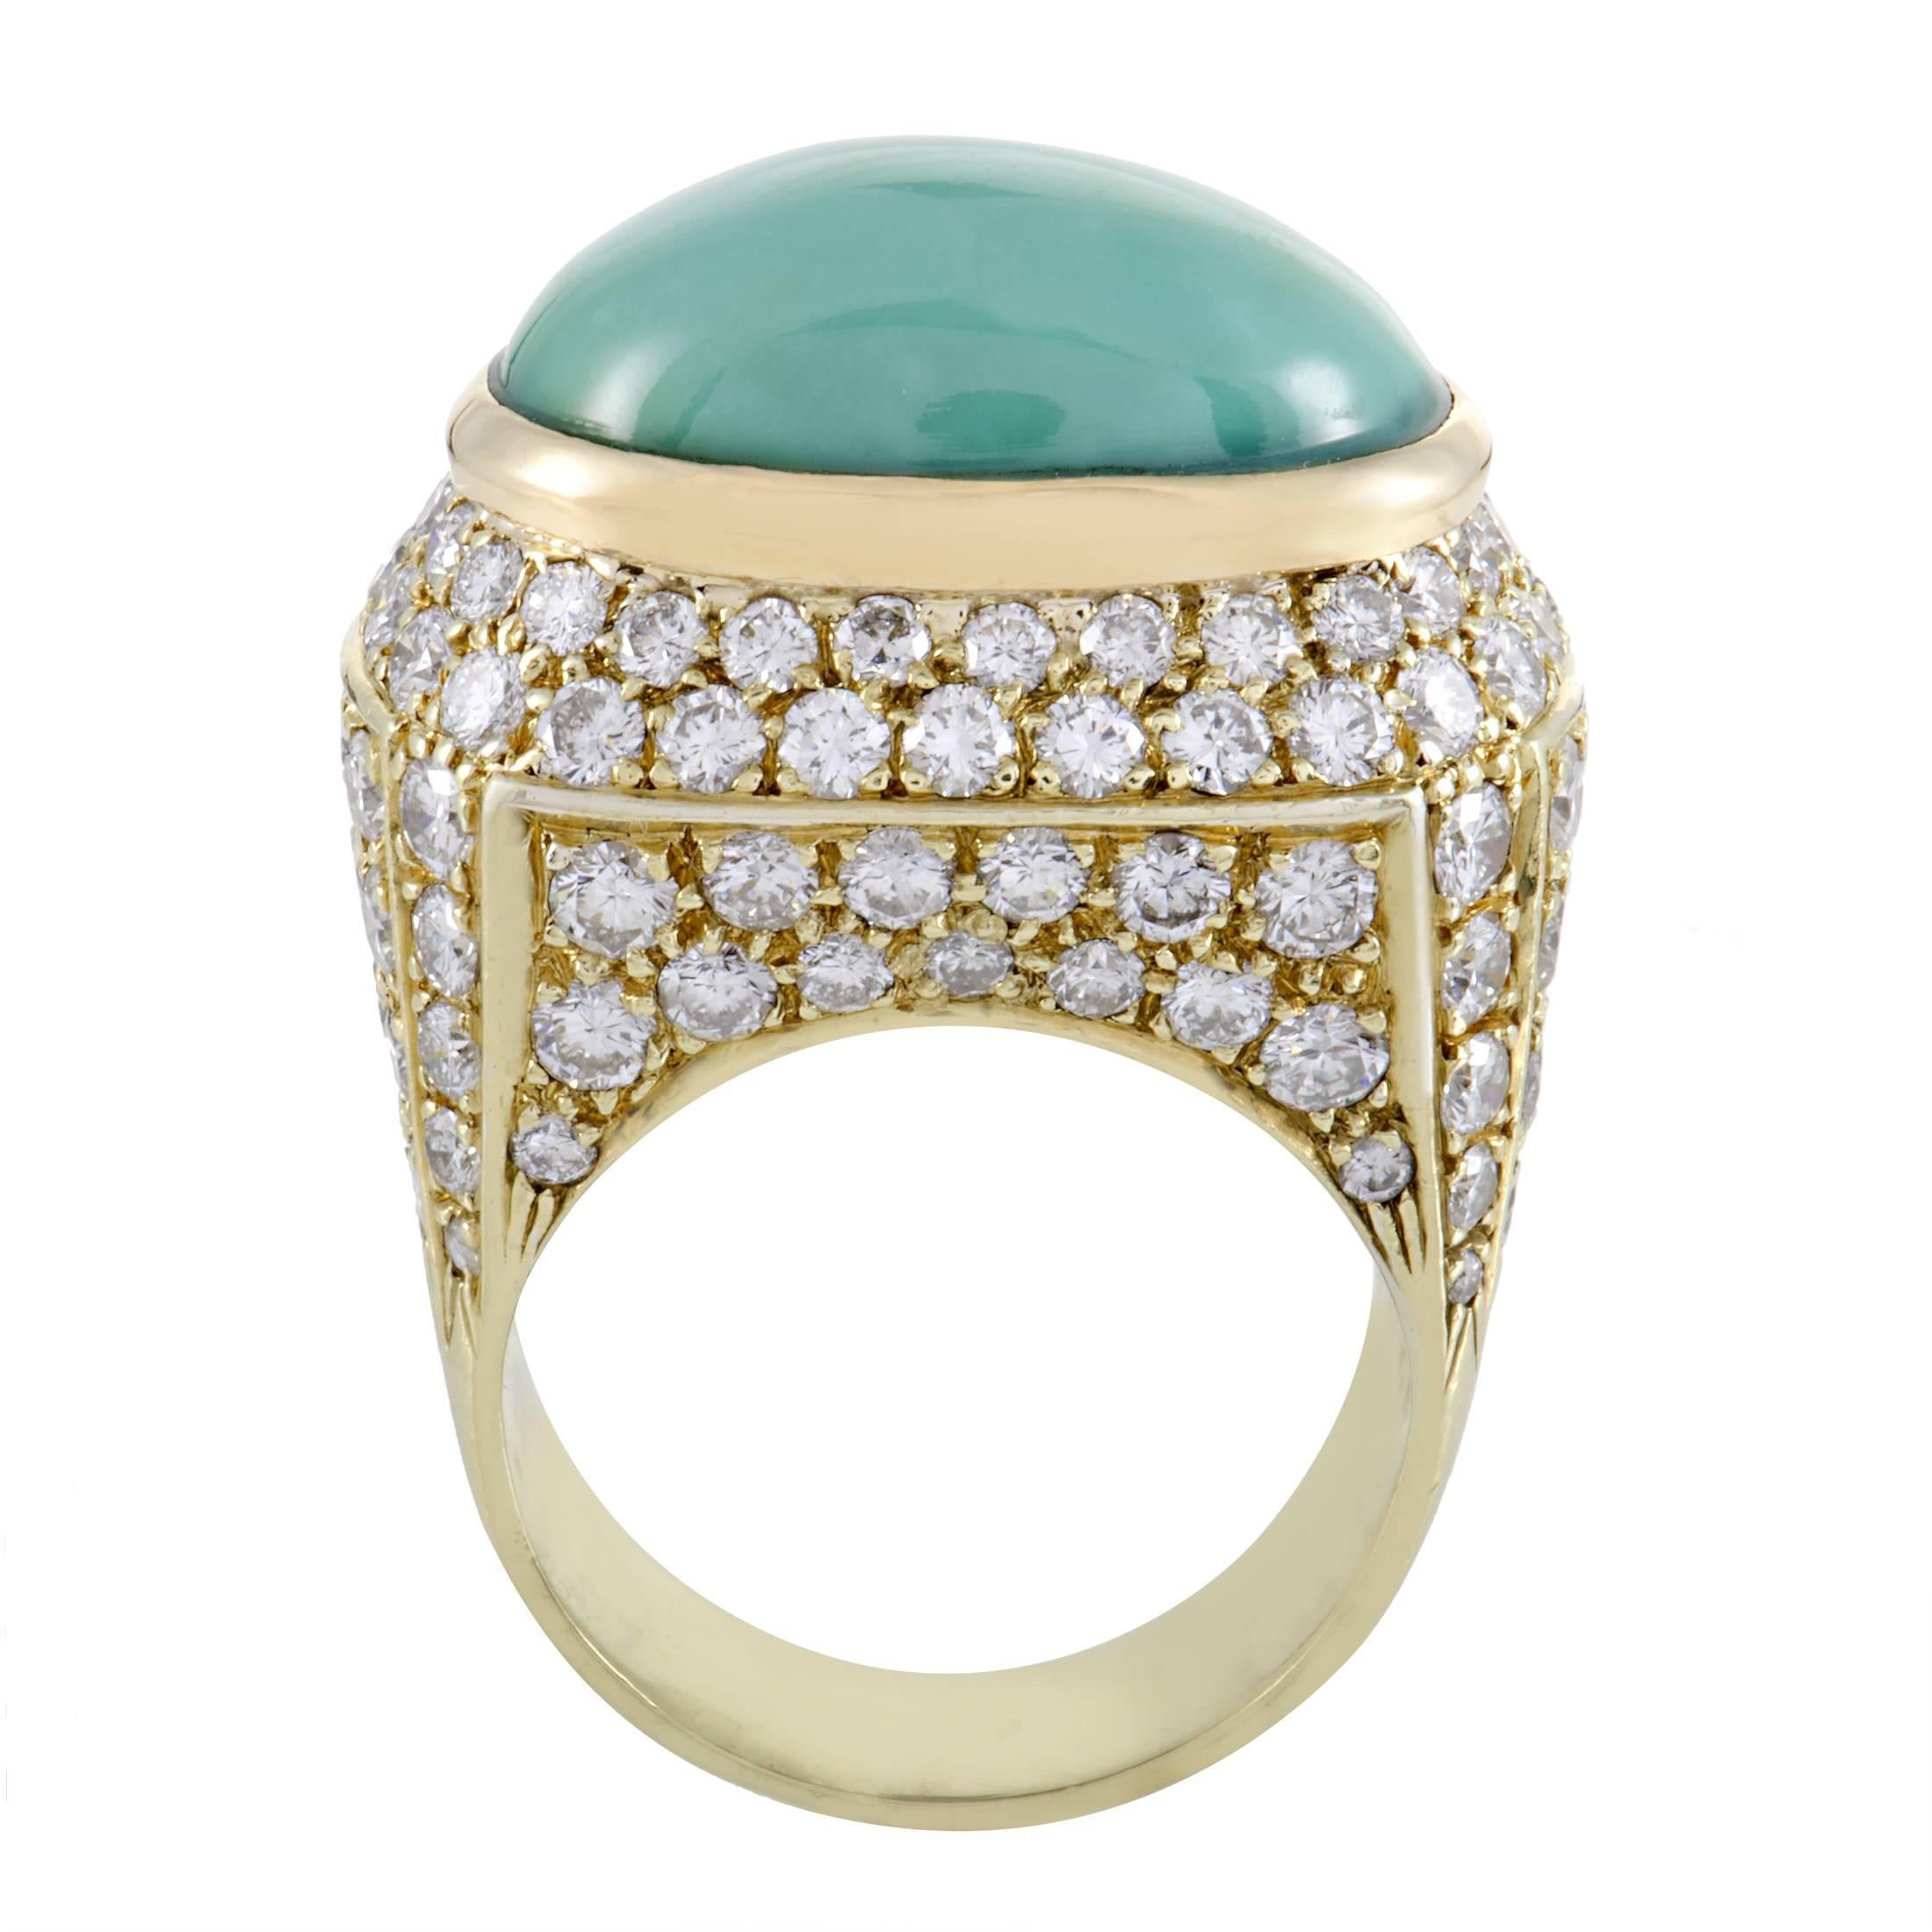 Lending its pleasant color and immaculate gleam to this majestic ring to produce exceptional aesthetic balance, the wonderful turquoise stone tastefully contrasts the glamorous blend of 18K yellow gold and glittering diamonds weighing in total